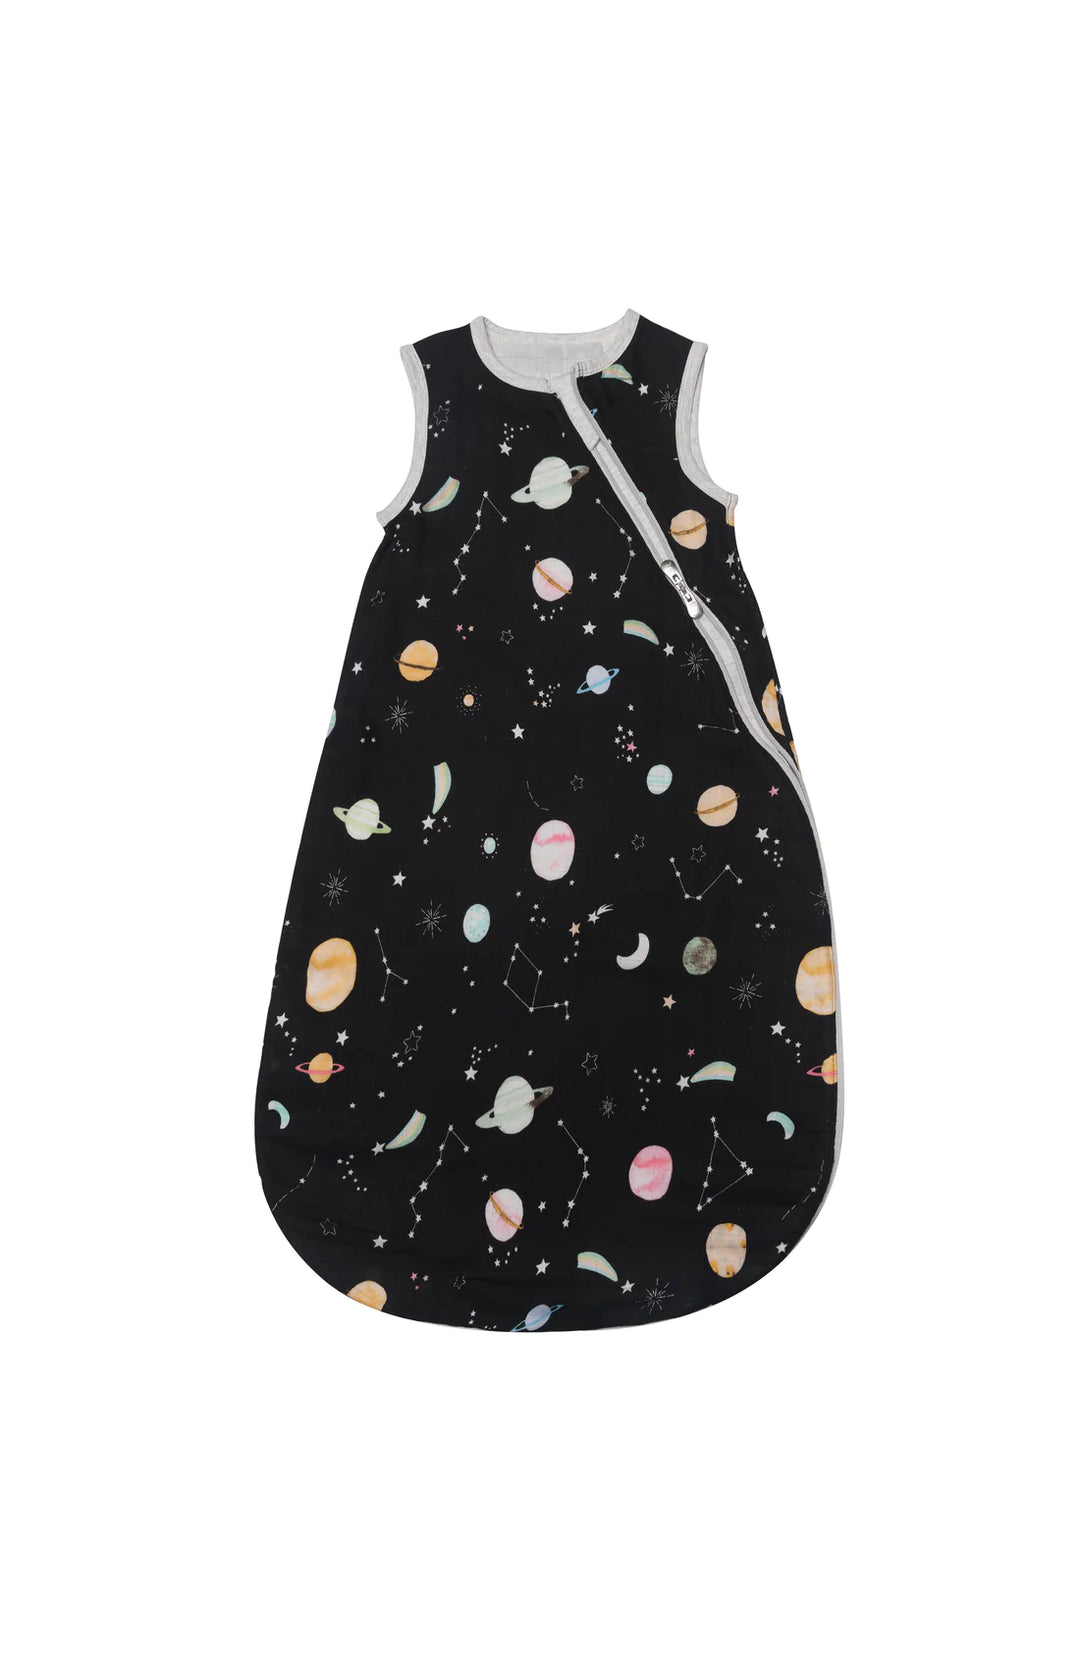 Planets Sleeping Bag by Loulou Lollipop